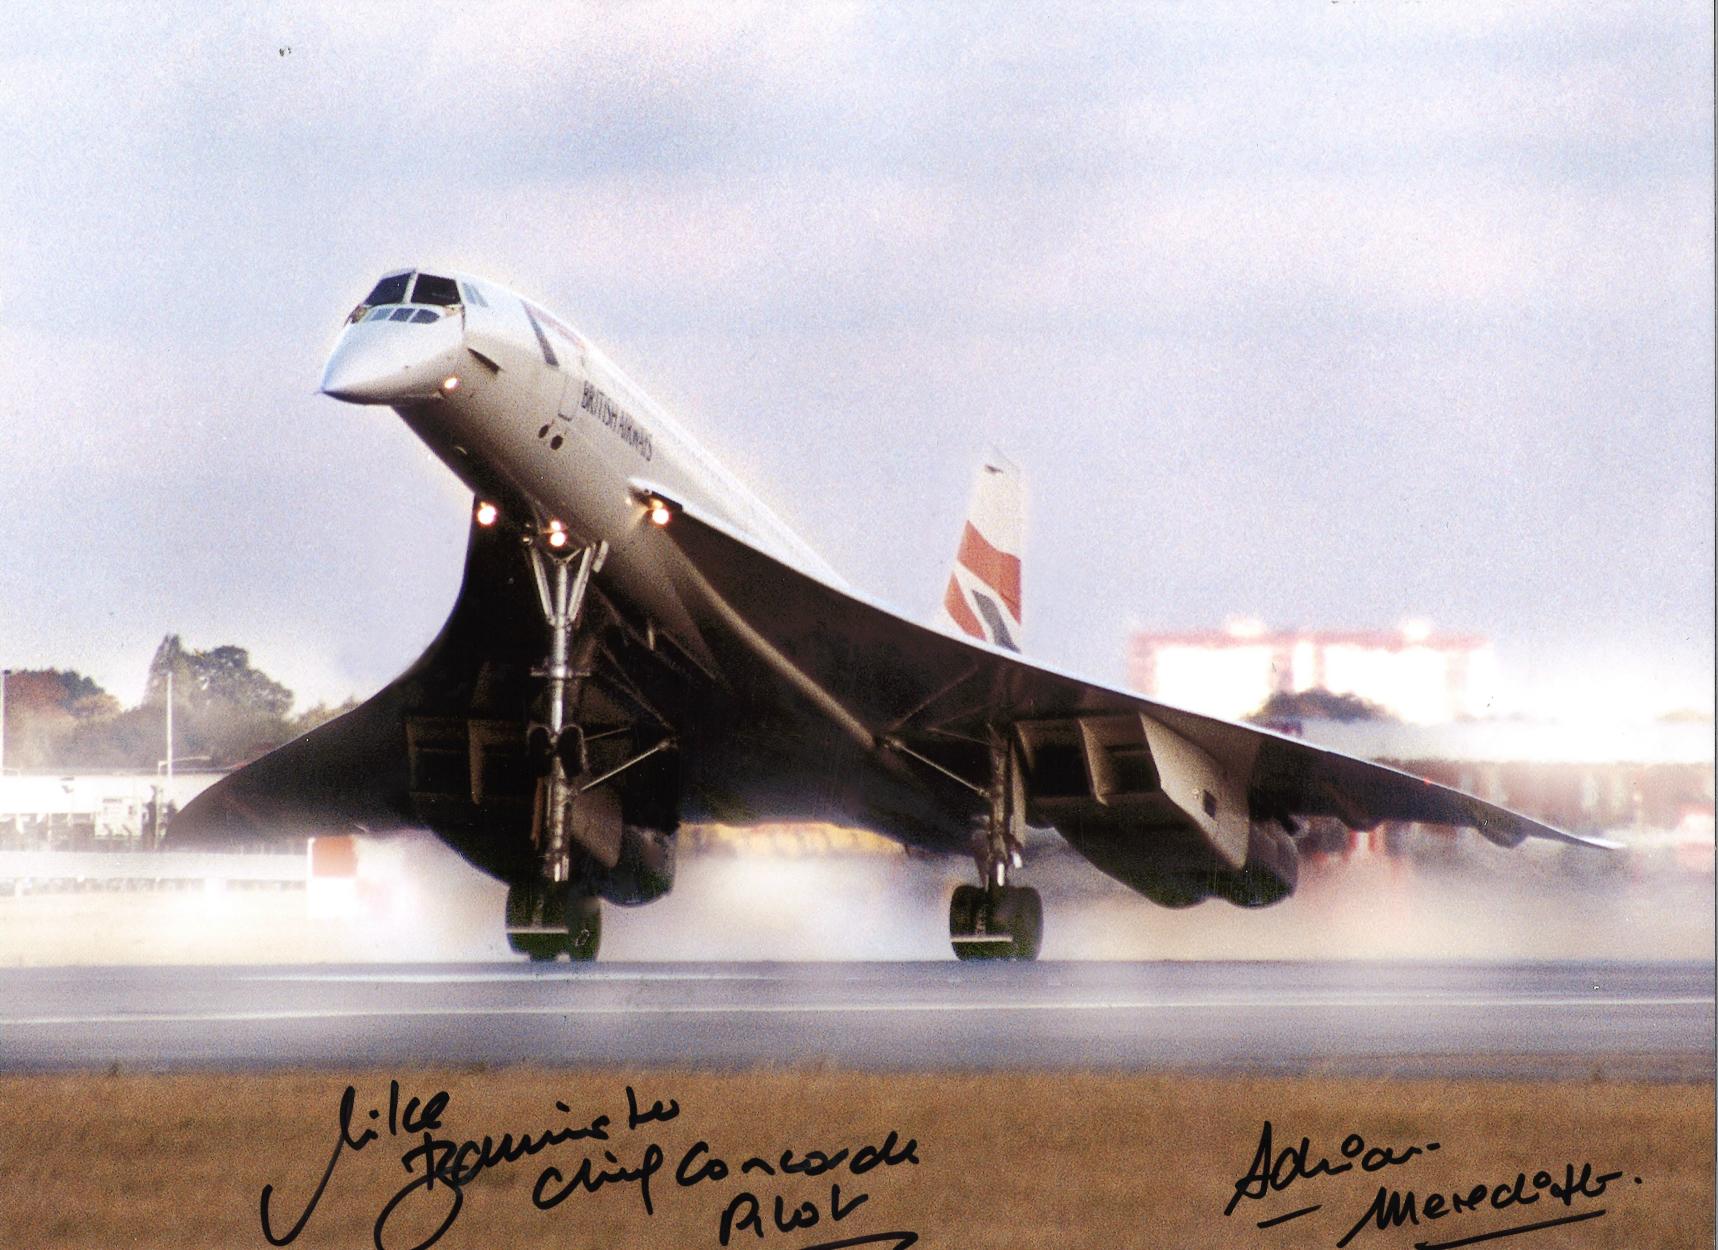 Mike Bannister and Adrian Meredith signed 16x12 Concorde photo. Slight indentations to photo but